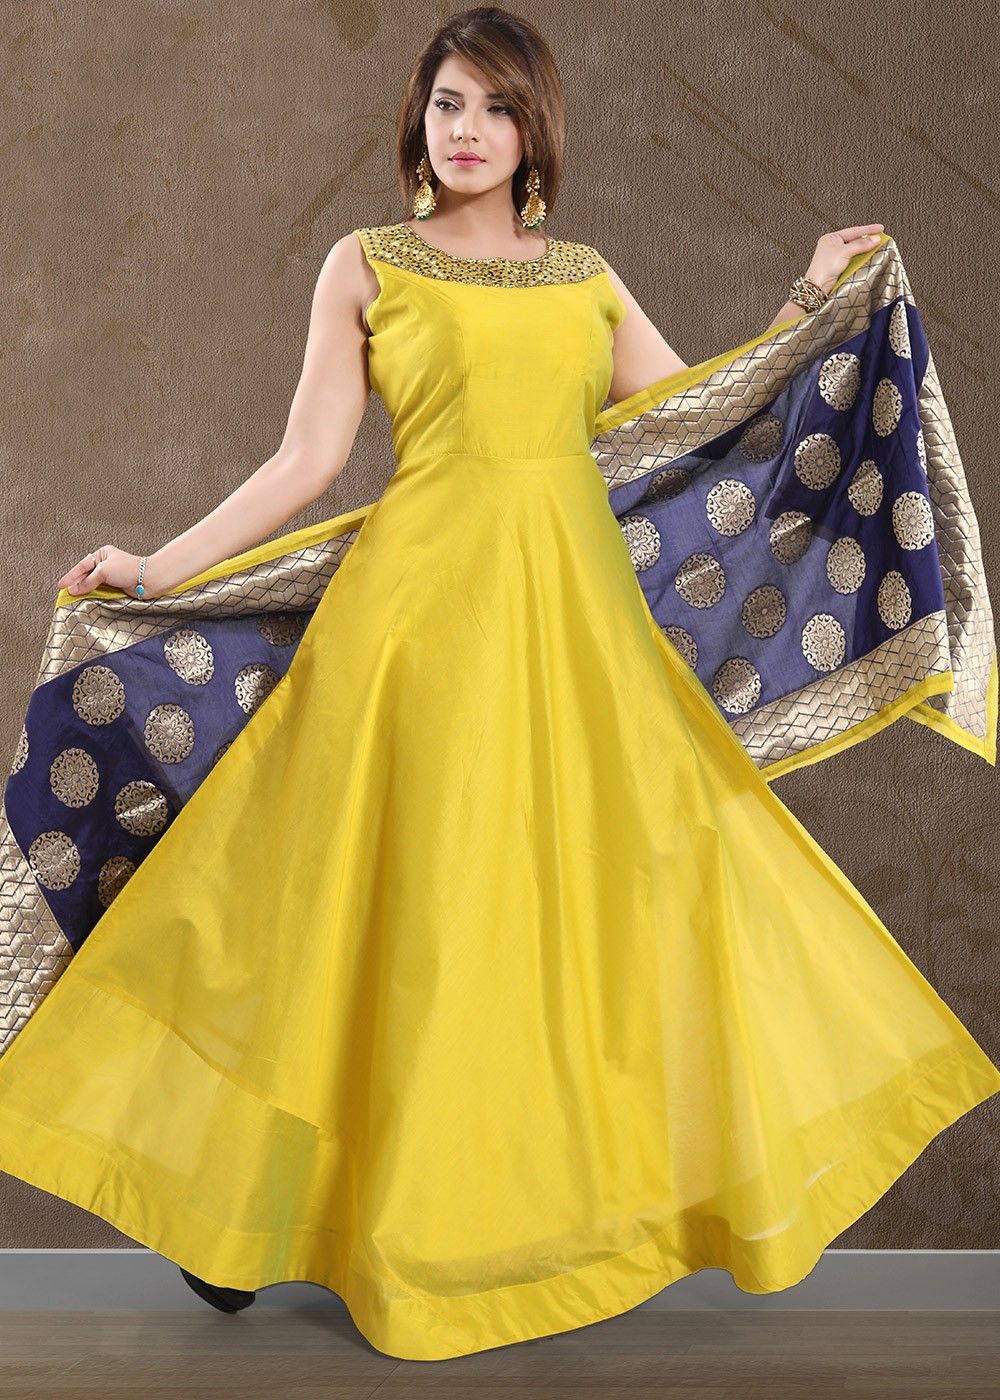 Readymade Yellow Anarkali Suit With Woven Dupatta Latest 3015SL10